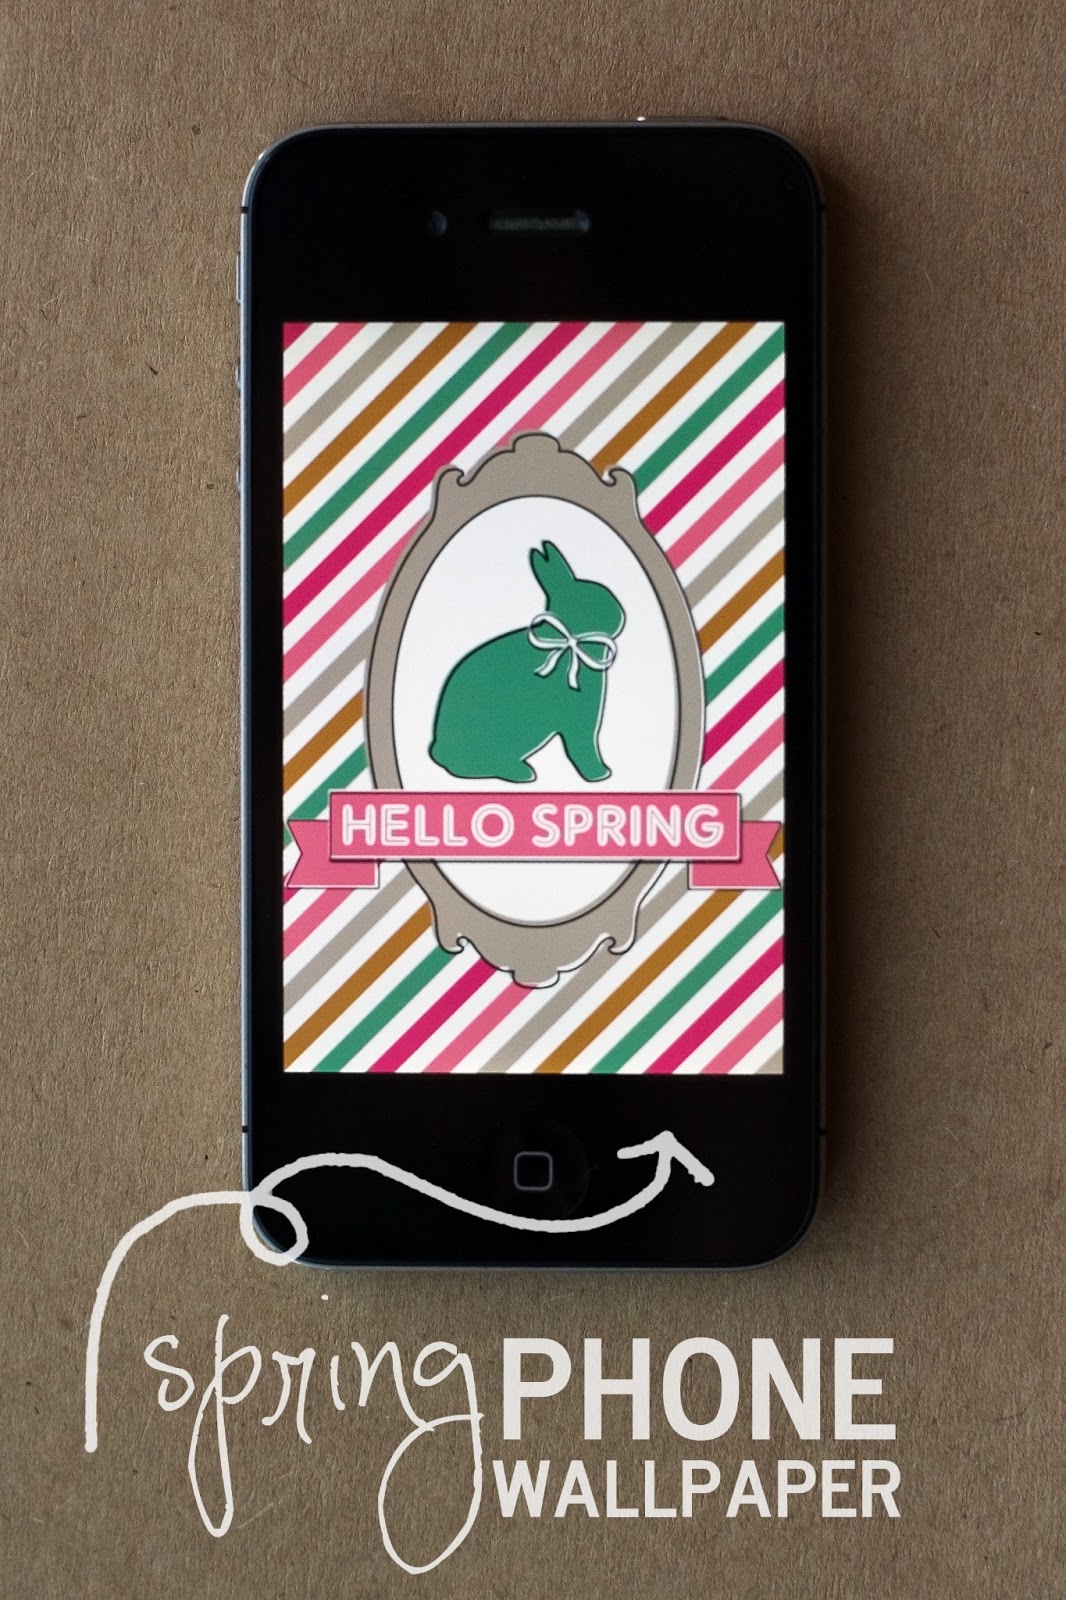 download the hello spring wallpaper here .